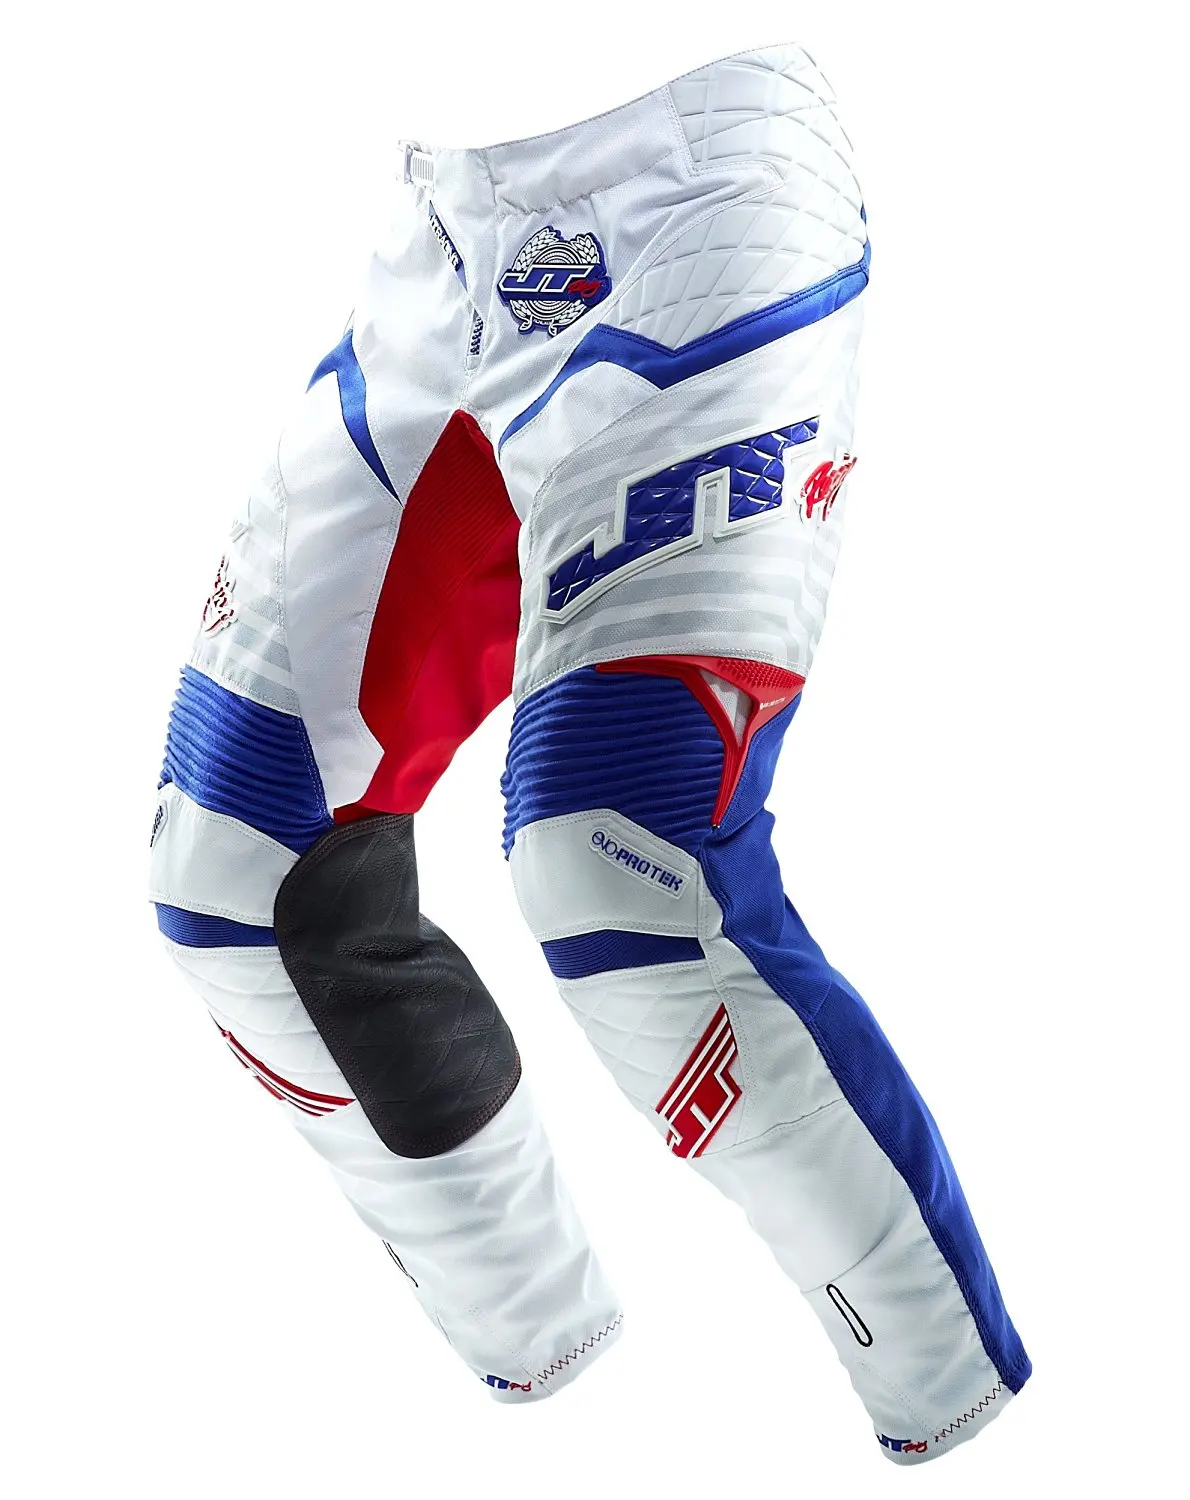 red white and blue dirt bike gear